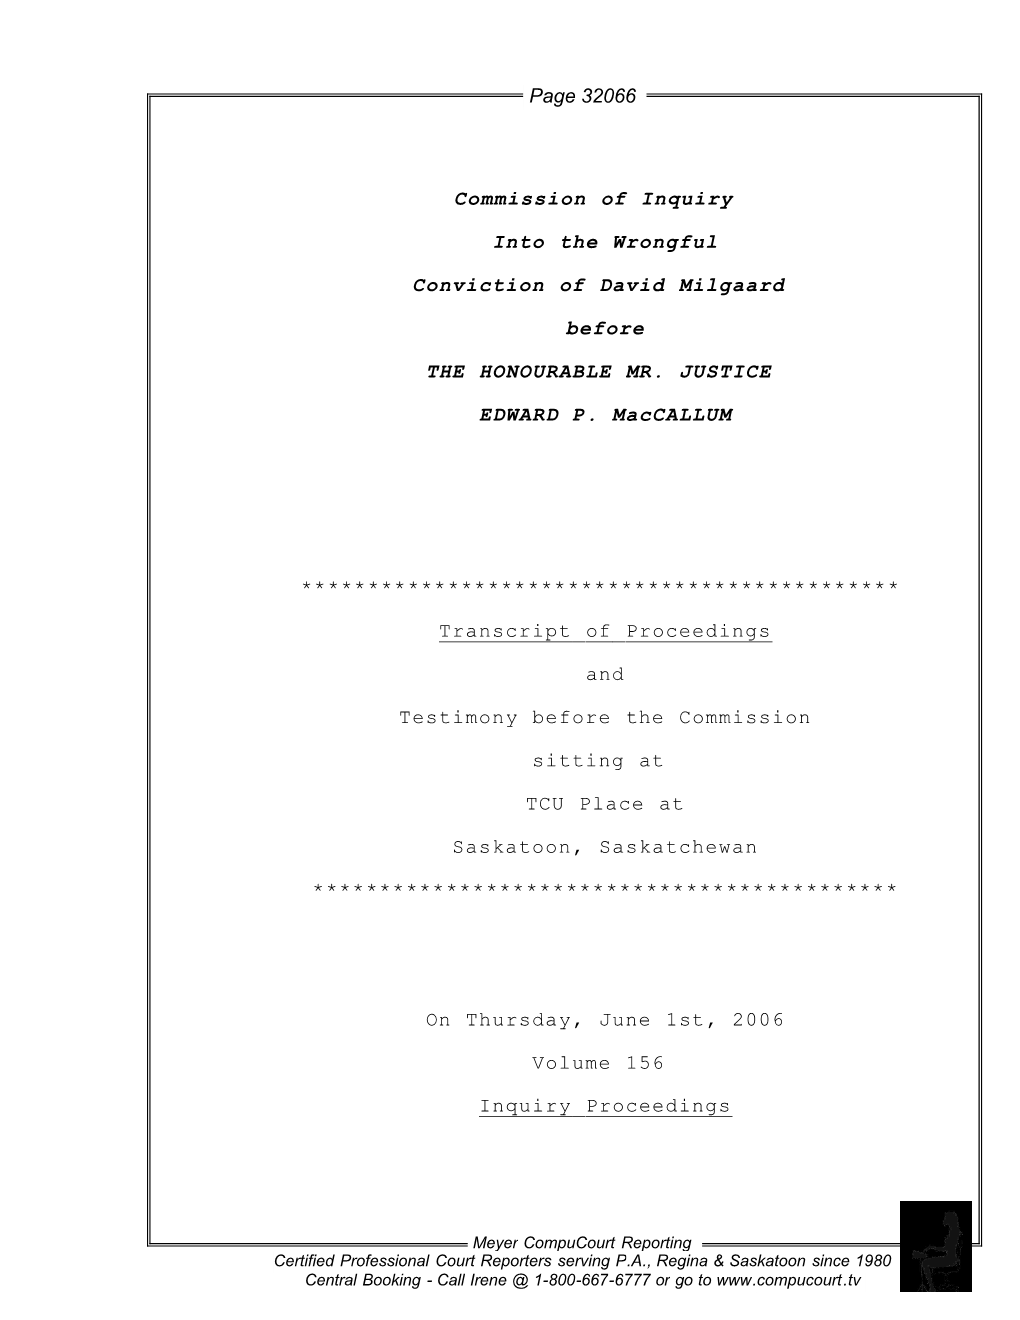 Page 32066 Commission of Inquiry Into the Wrongful Conviction Of